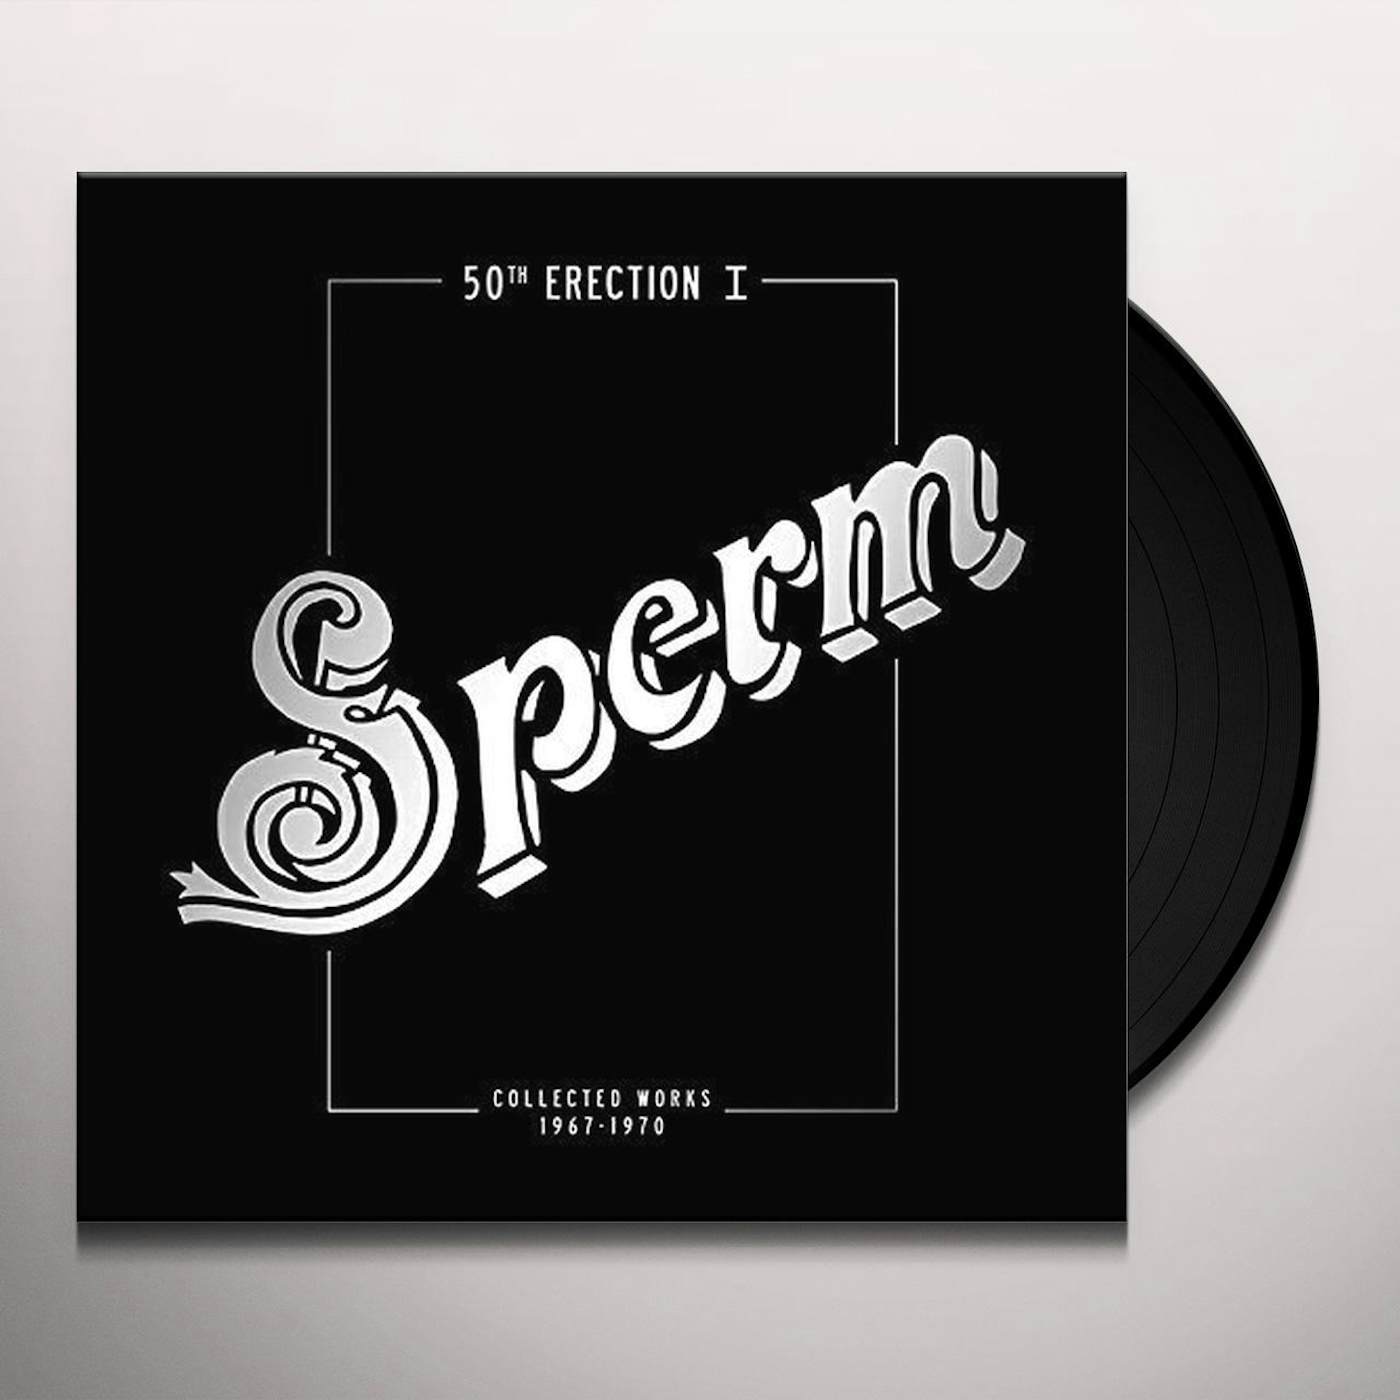 Sperm 50TH ERECTION I: COLLECTED WORKS 1967-1970 Vinyl Record